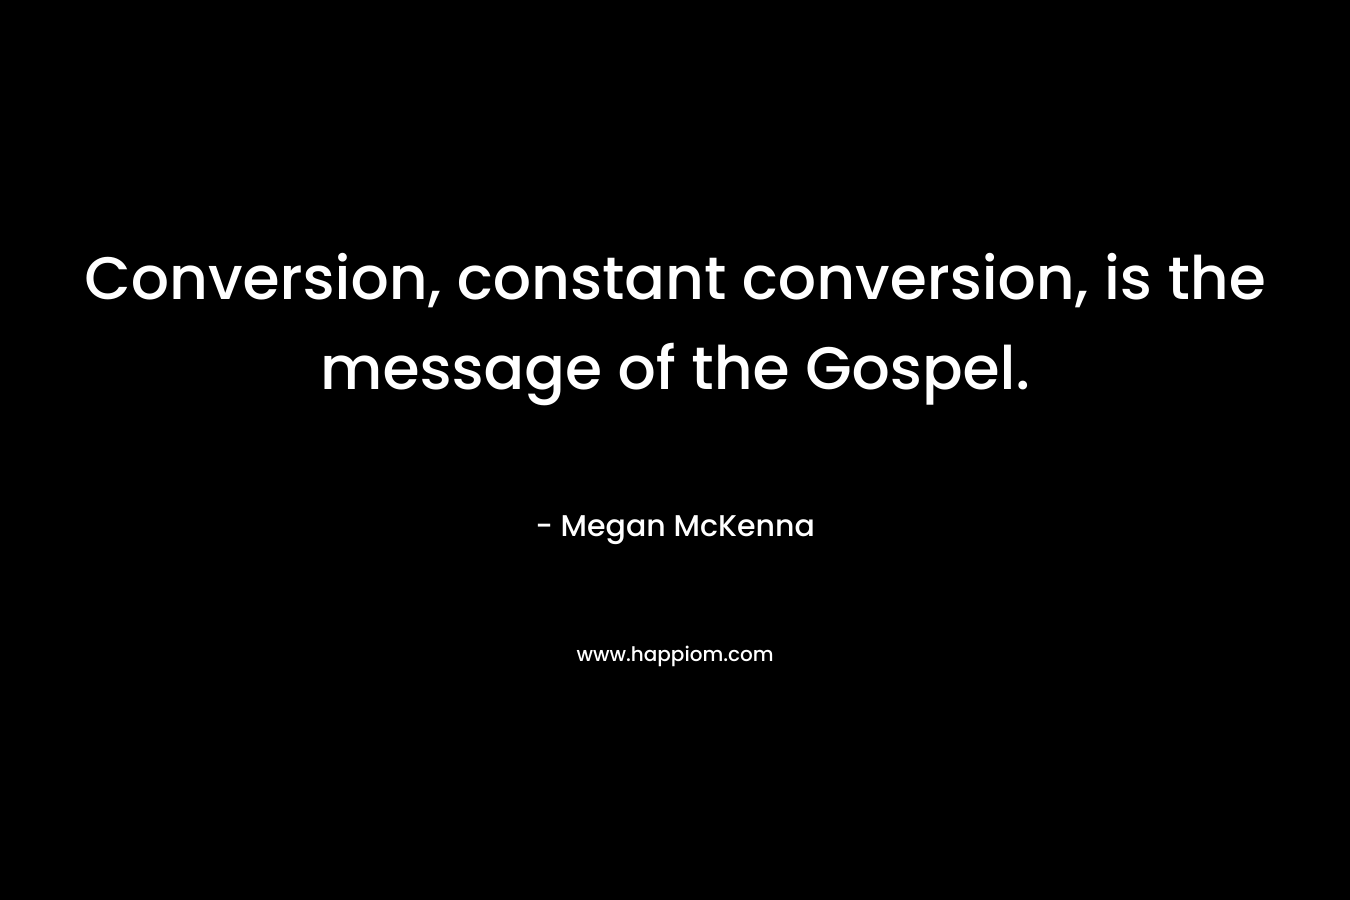 Conversion, constant conversion, is the message of the Gospel.